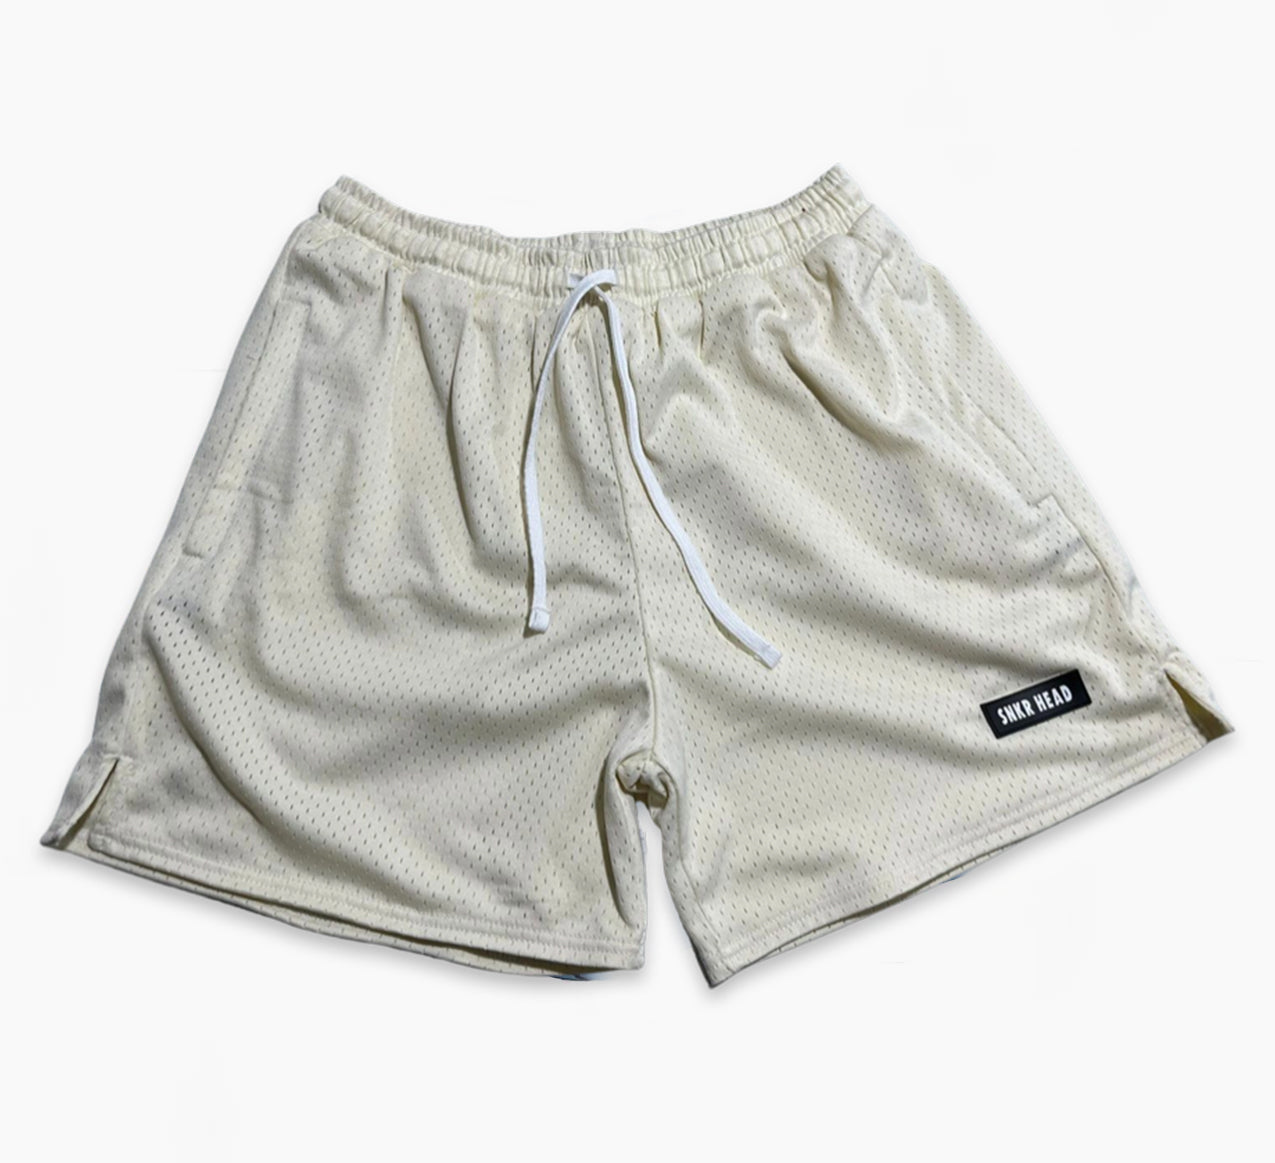 Cut & Sew Everyday SNKR HEAD Cream Rubber Patch Shorts